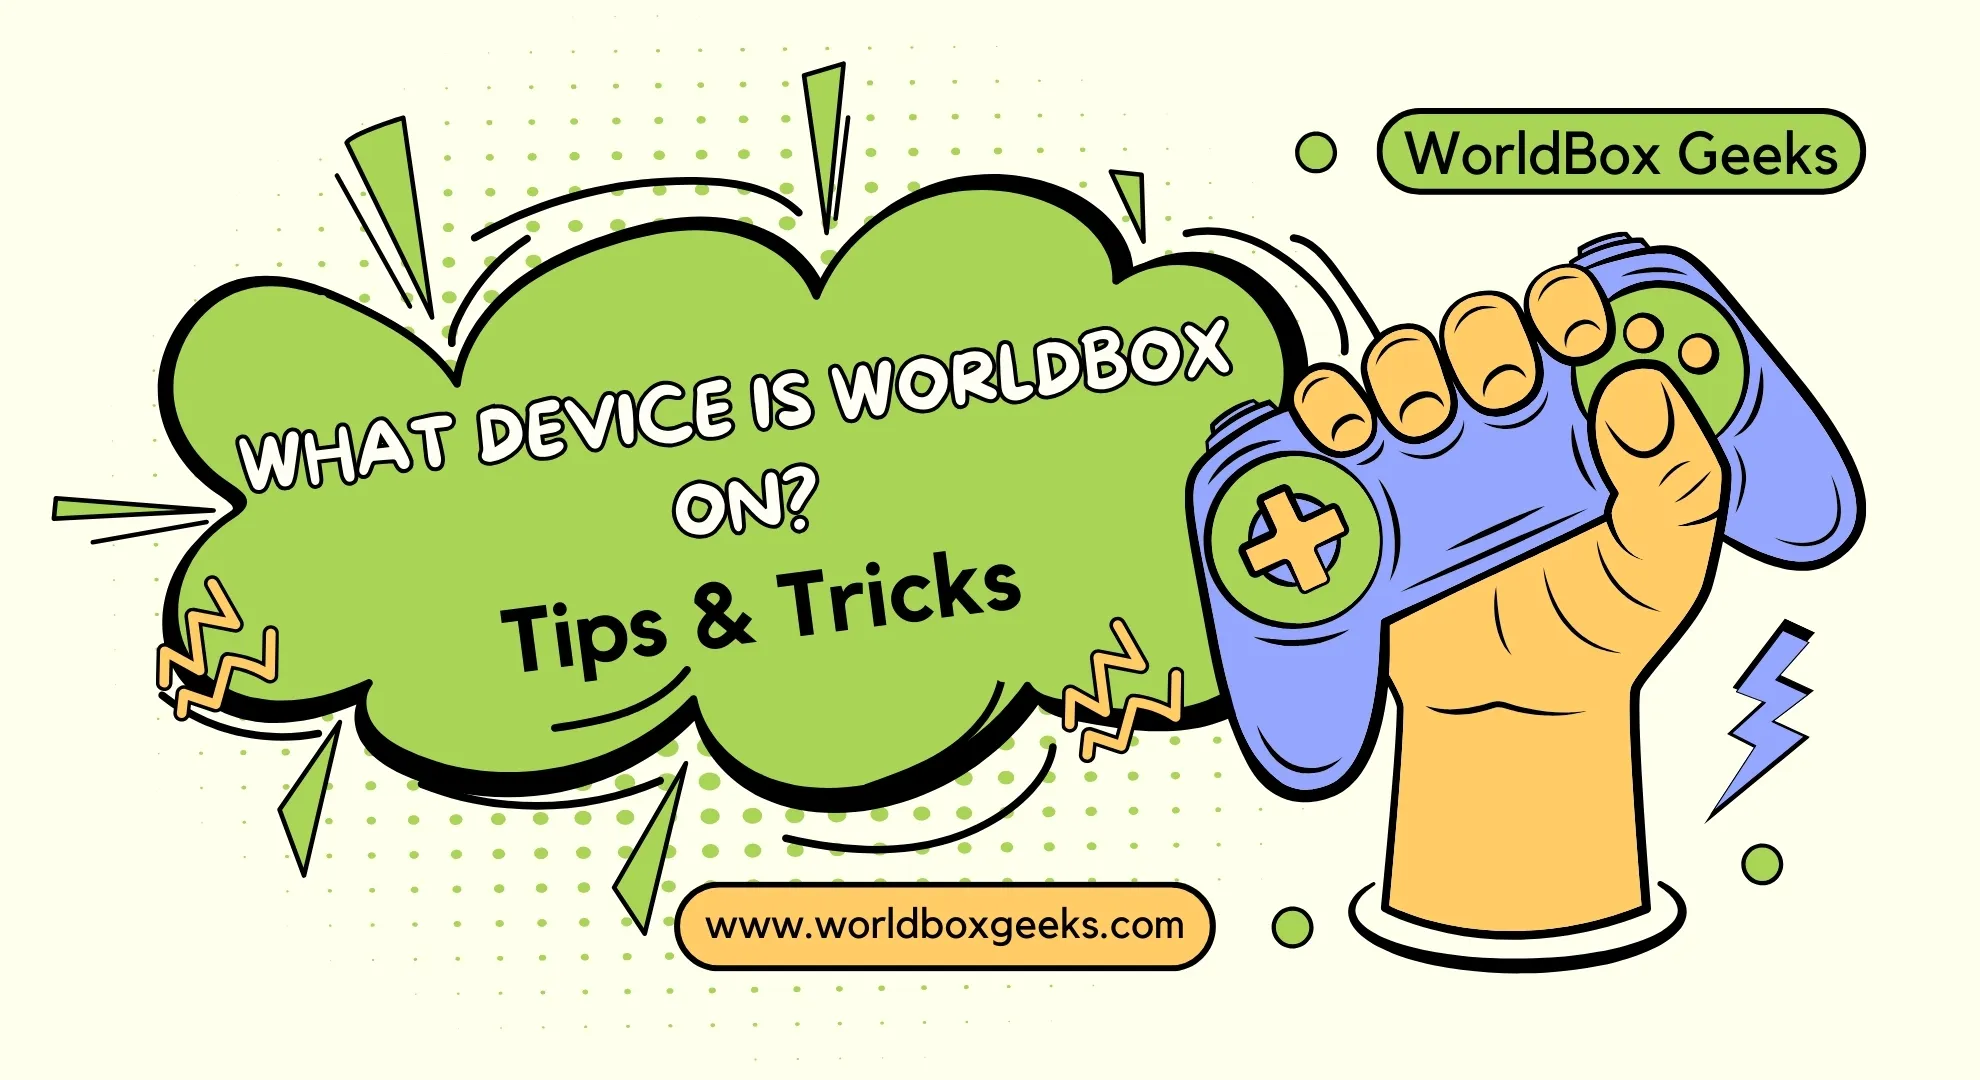 What device is WorldBox on